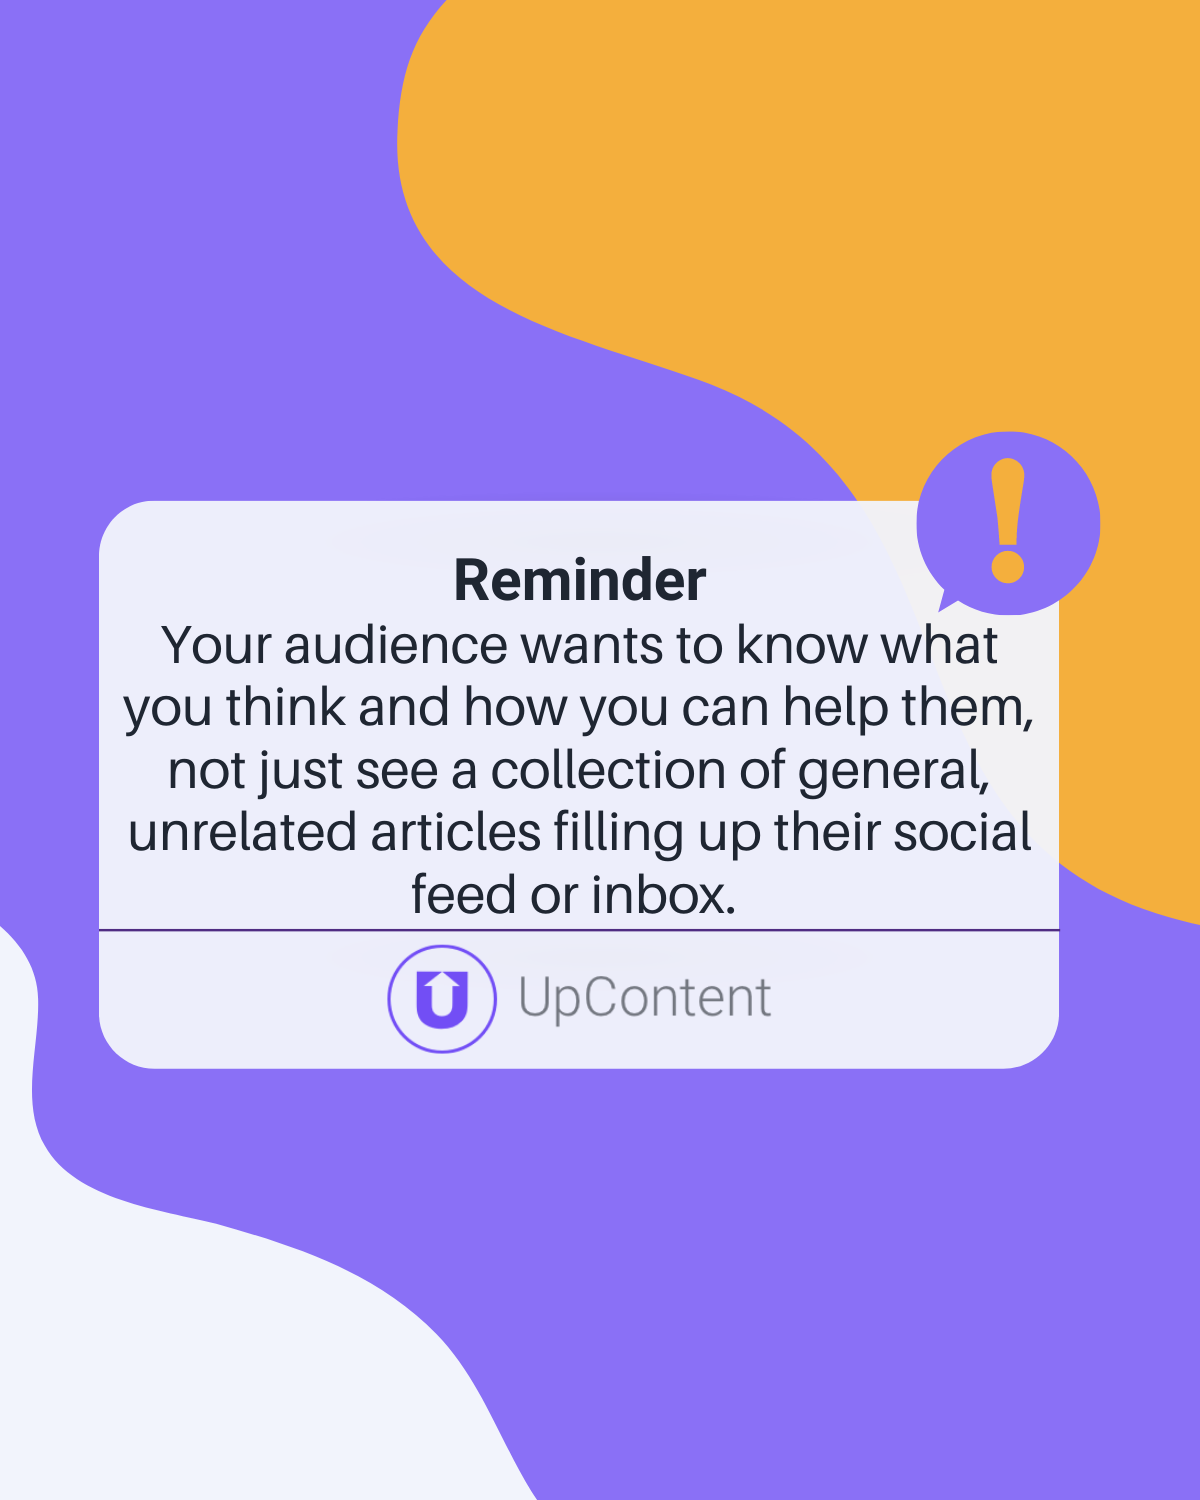 Your audience wants to know what you think and how you can help them, not just see a collection of general, unrelated articles filling up their social feed or inbox. 